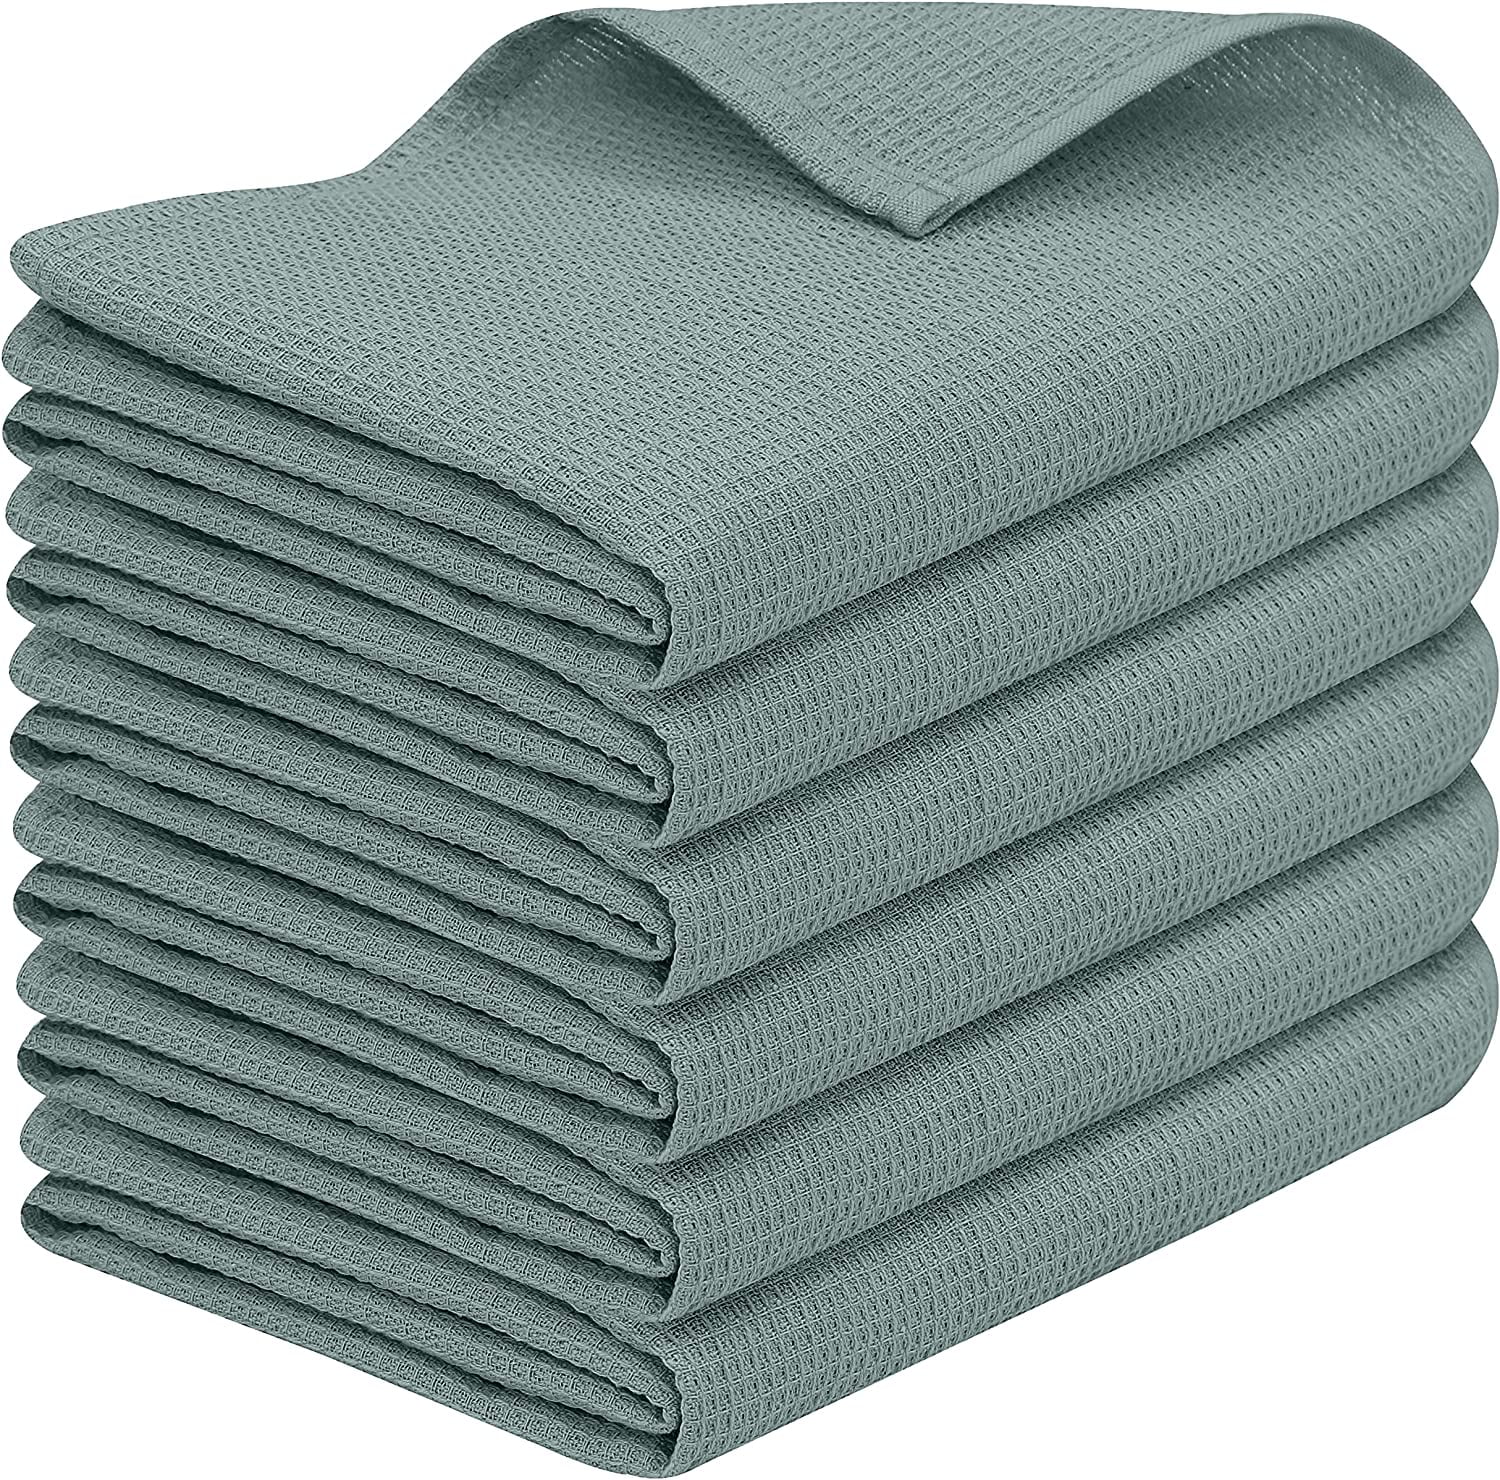 Smiry 100% Cotton Waffle Weave Kitchen Dish Towels, Ultra Soft Absorbent  Quick Drying Cleaning Towel, 13x28 Inches, 4-Pack, Light Grey 